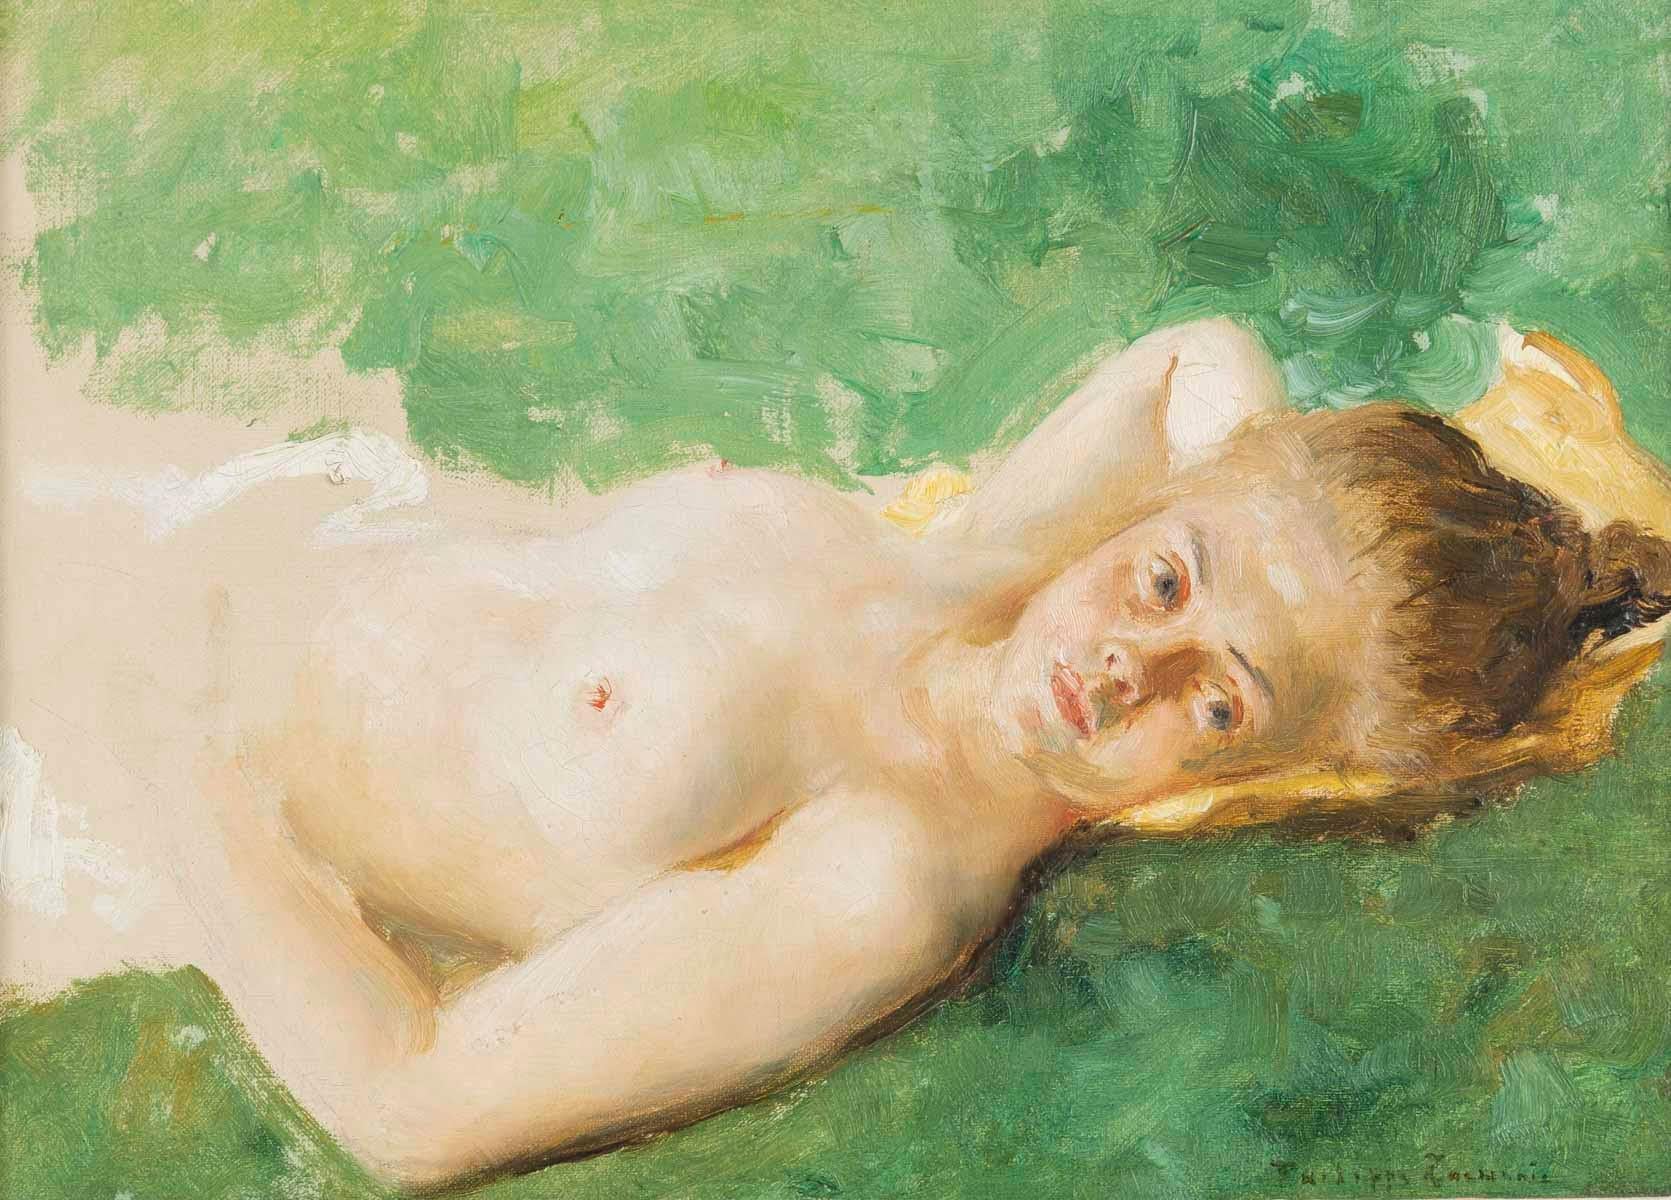 Oil on canvas, painting by Philippe Zacharie (1849-1915).

Painting, oil on canvas representing a nude study, woman lying in the grass by Philippe Zacharie (1849-1915).
Painting: H: 23cm, W: 31.5cm
Frame: H: 37, W: 46, D: 3cm